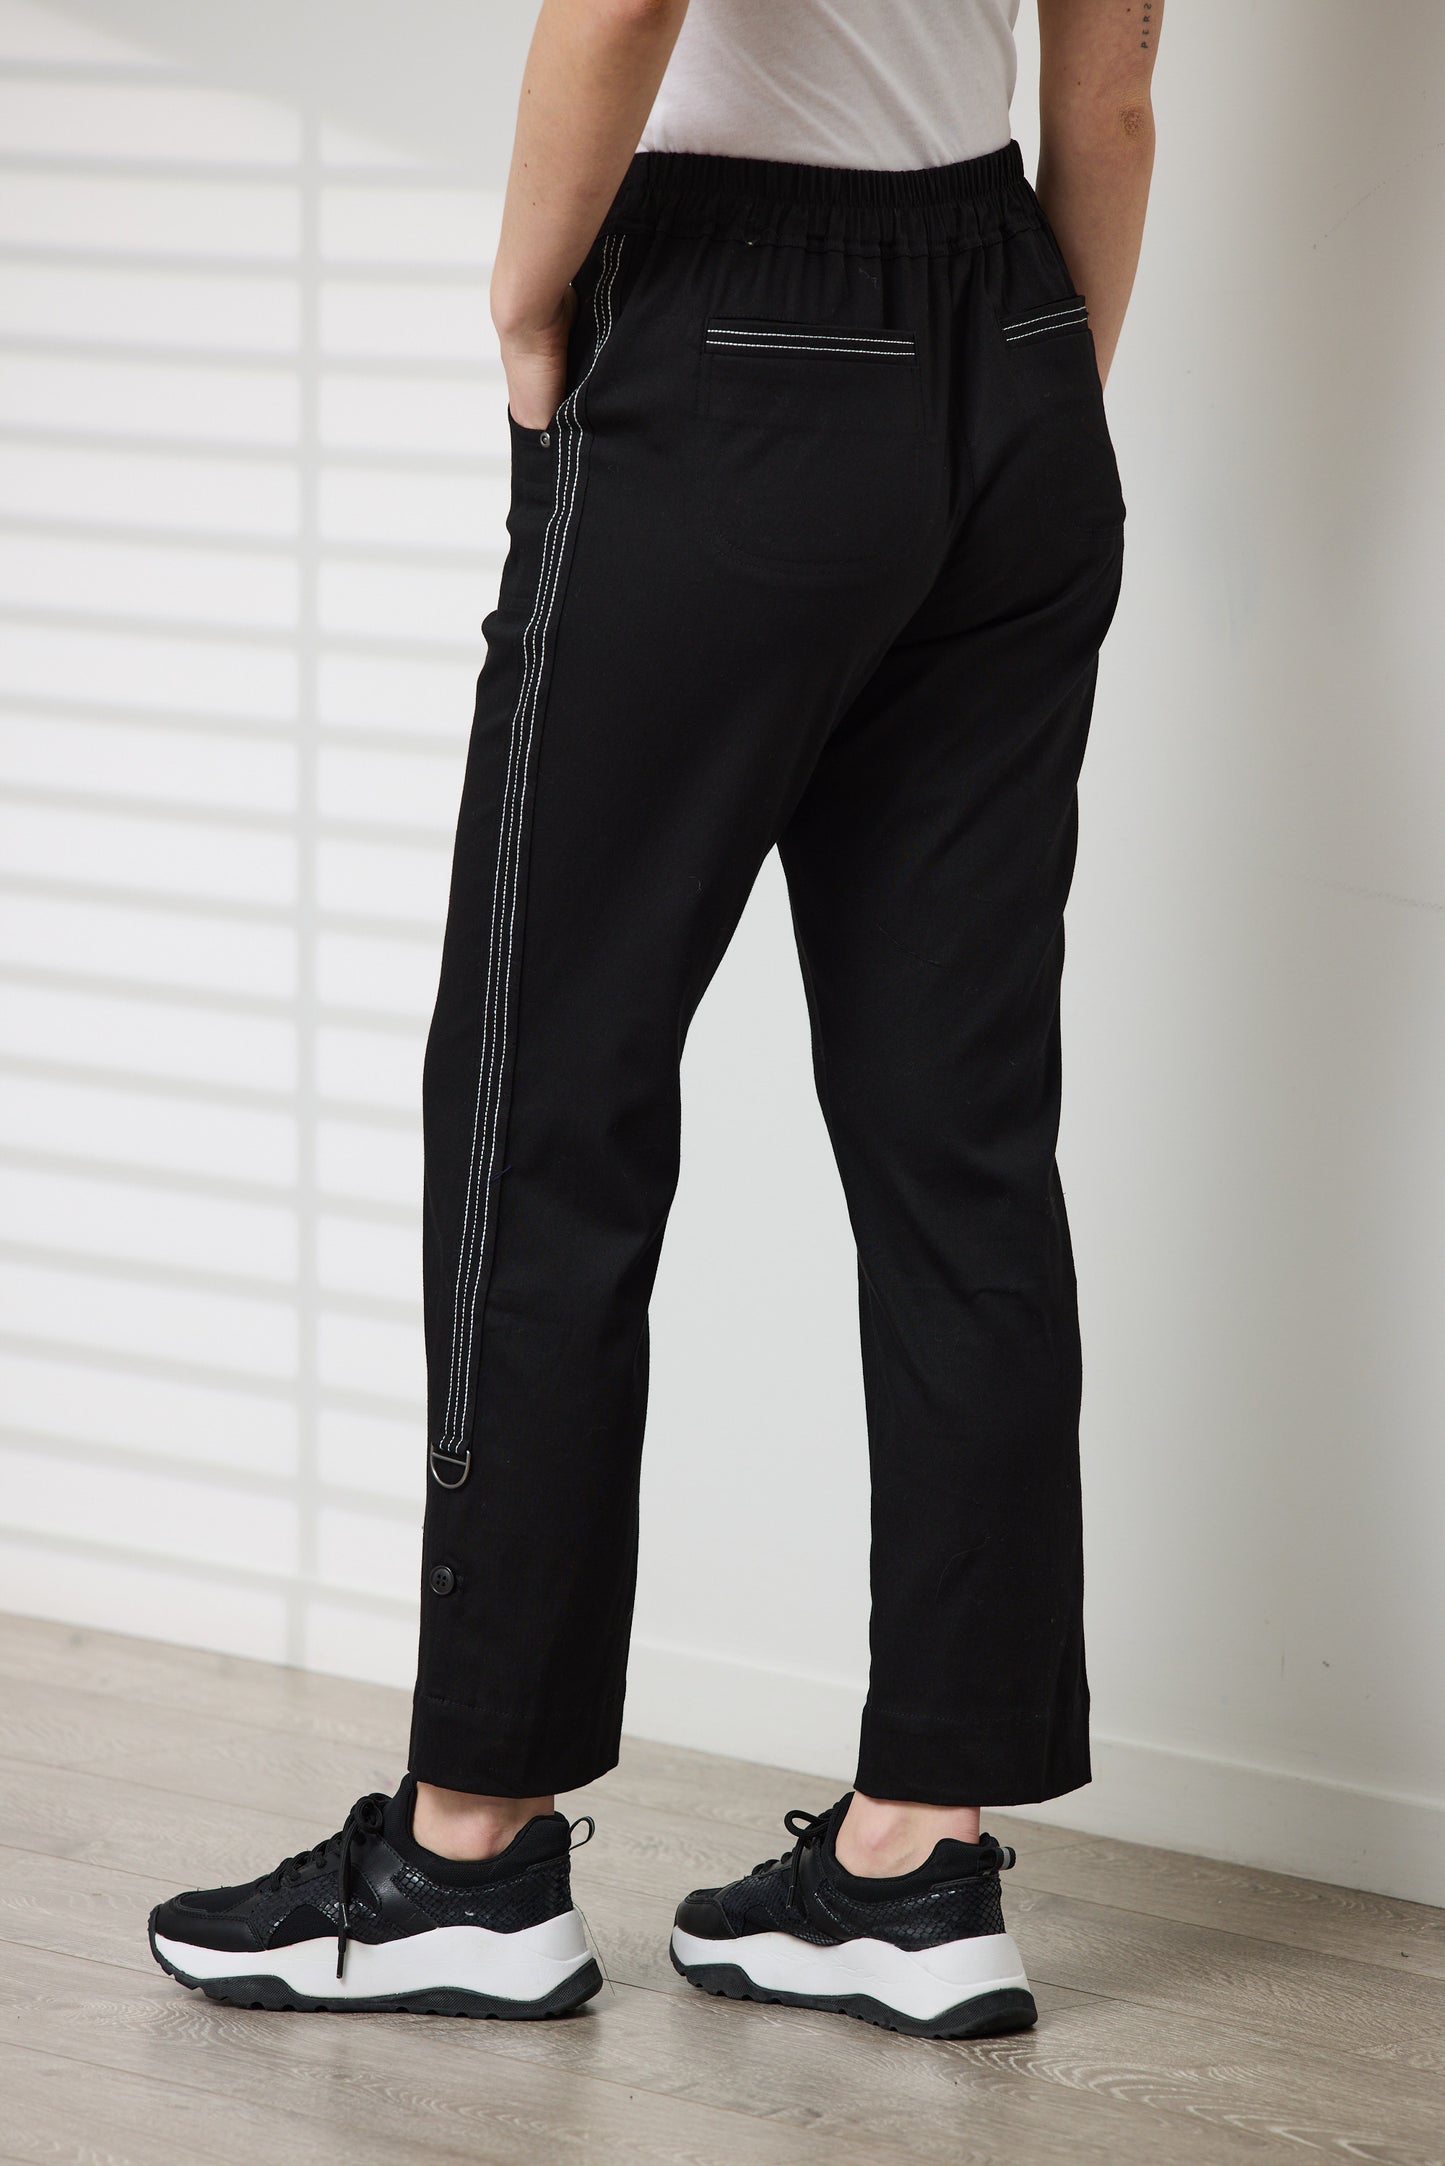 Newport - Aiden Cotton Twill Pull On Pant -  NP27780 - Black - INSTORE